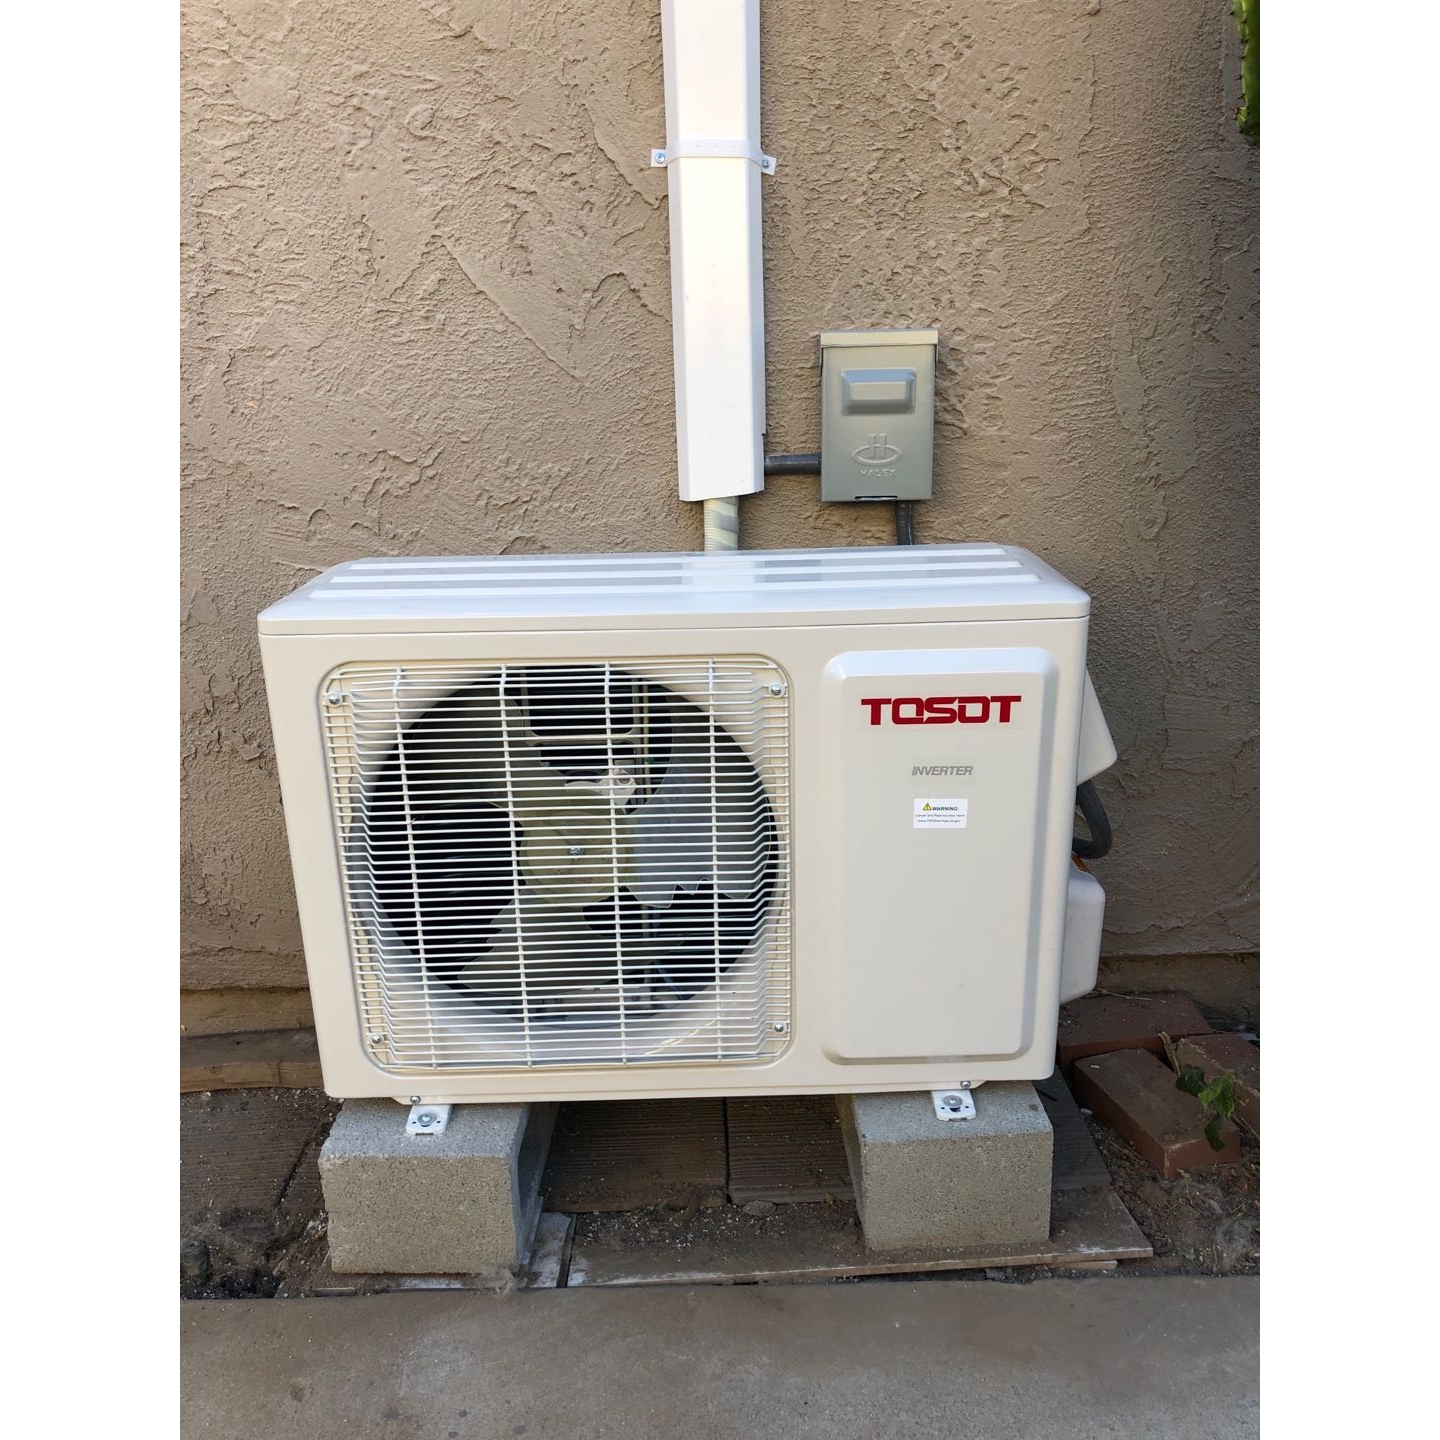 Tosot 18 Seer Wall Mount Ductless Mini Split Air Conditioner Heat Pump 115v By Gree 15 Feet Line Set 2548